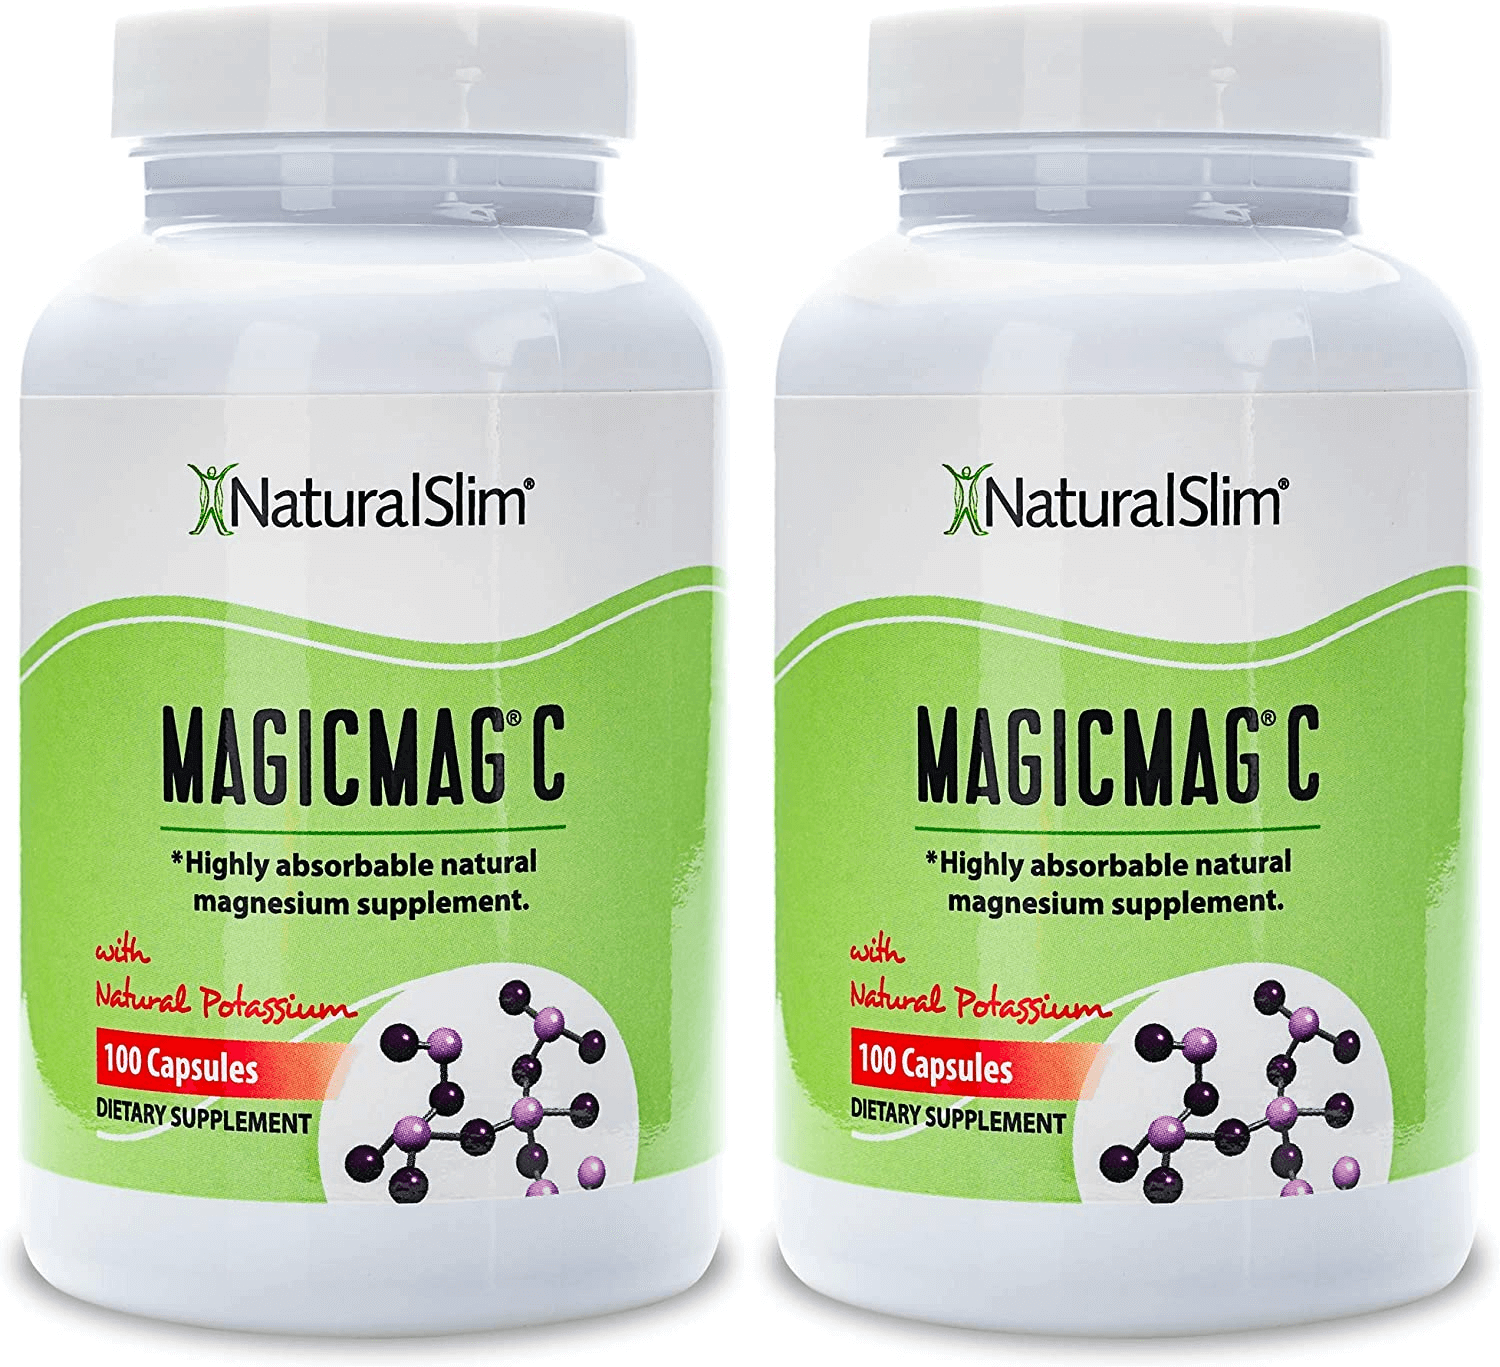 Naturalslim Magicmag C Magnesium Citrate Capsules, 400 Mg – Magnesium Supplement with Natural Potassium | Sleep Support, Heart Health, and Muscle Cramp Relief | Gluten-Free, 100 Capsules (2 Pack) - vitamenstore.com